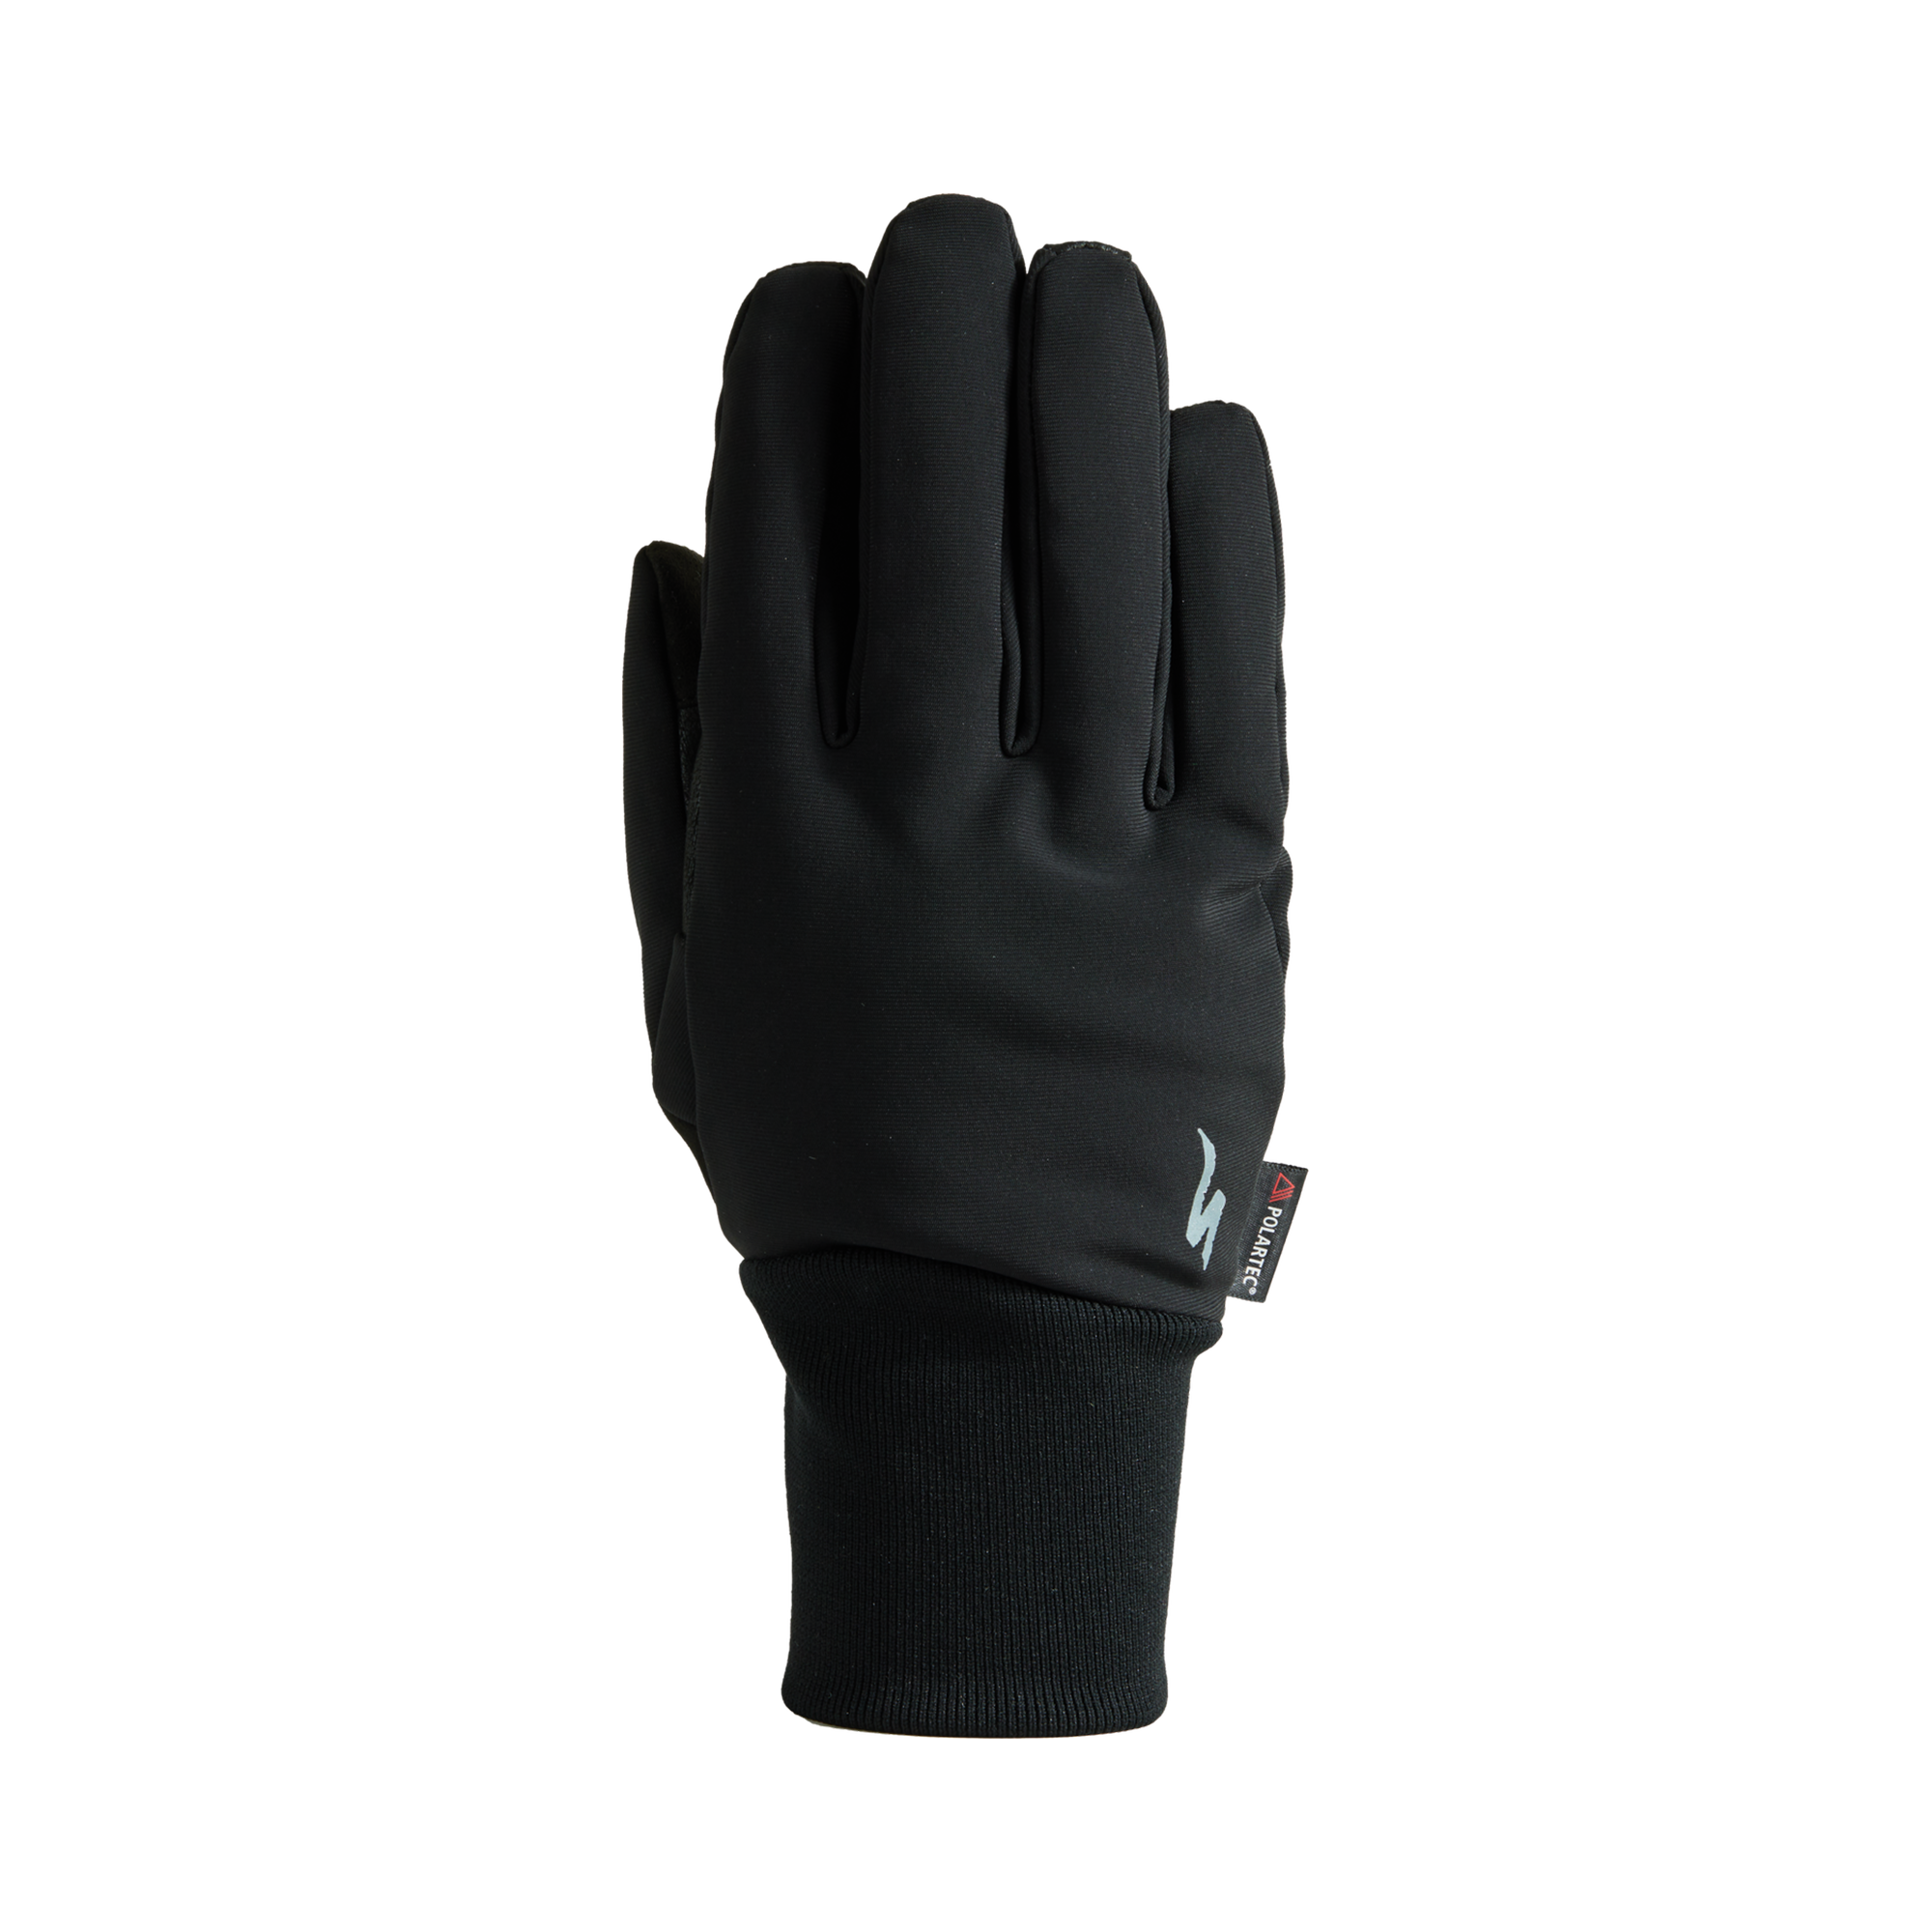 guantes bici mujer Cheap online - OFF 67%